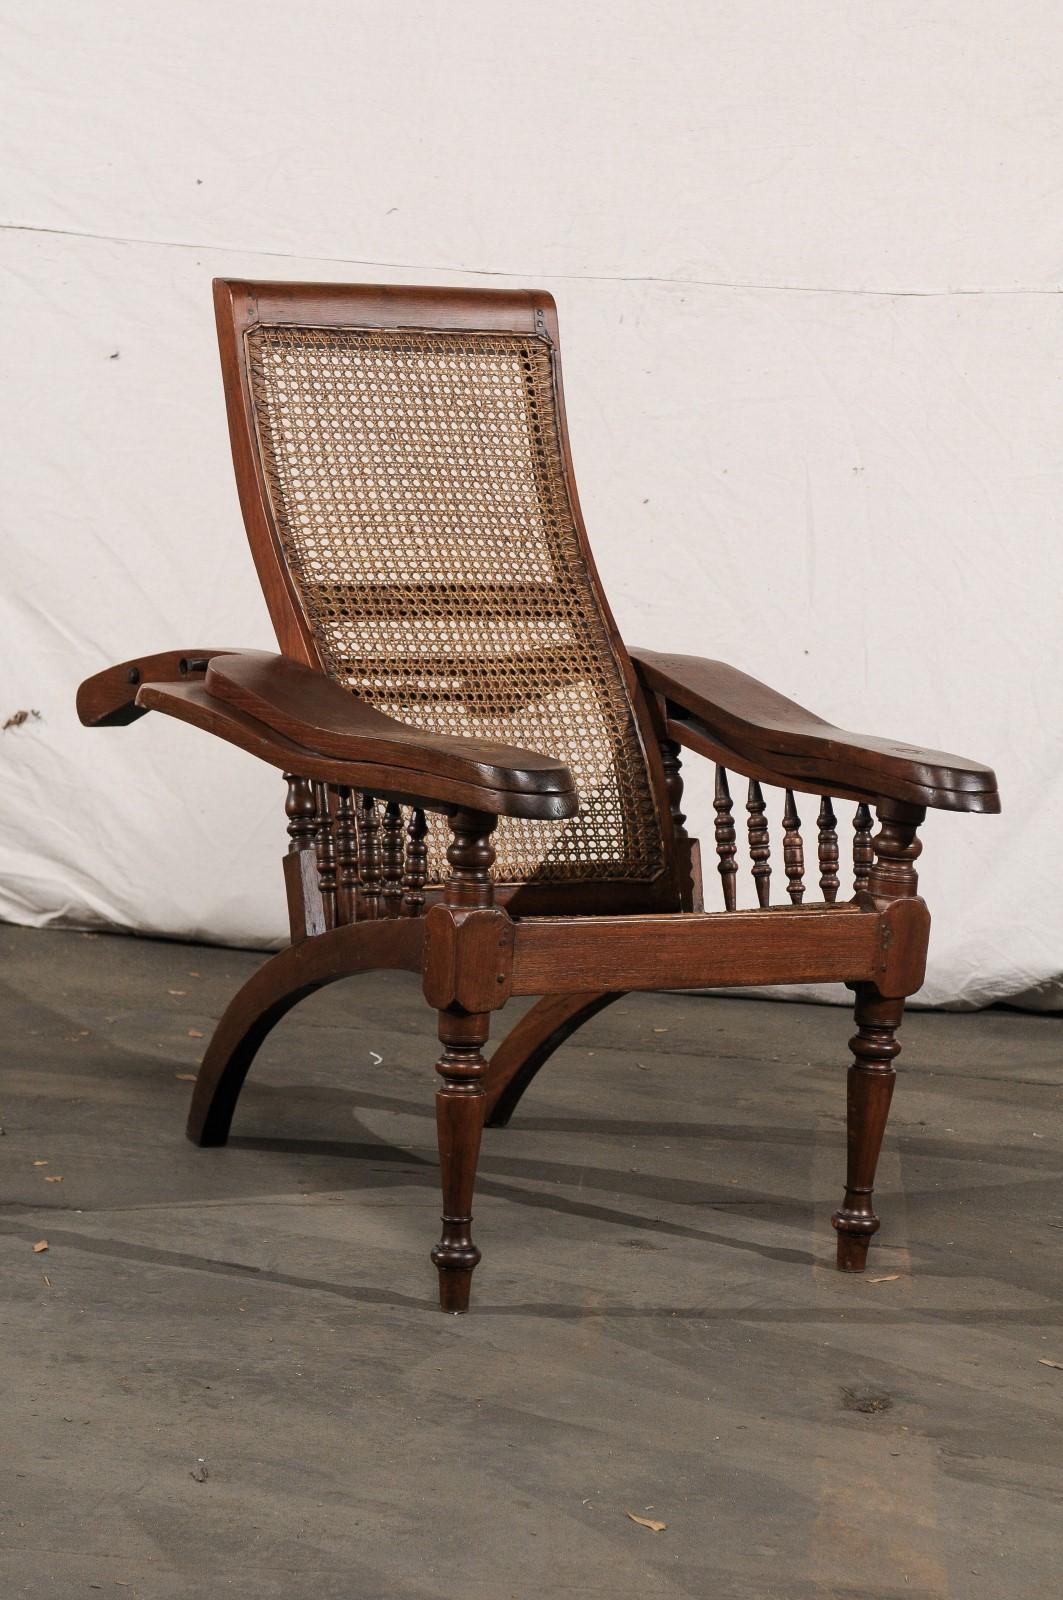 19th Century Anglo-Indian Caned Planters Chair with Leg Stretchers, Metamorphic, and brass screws
31.5